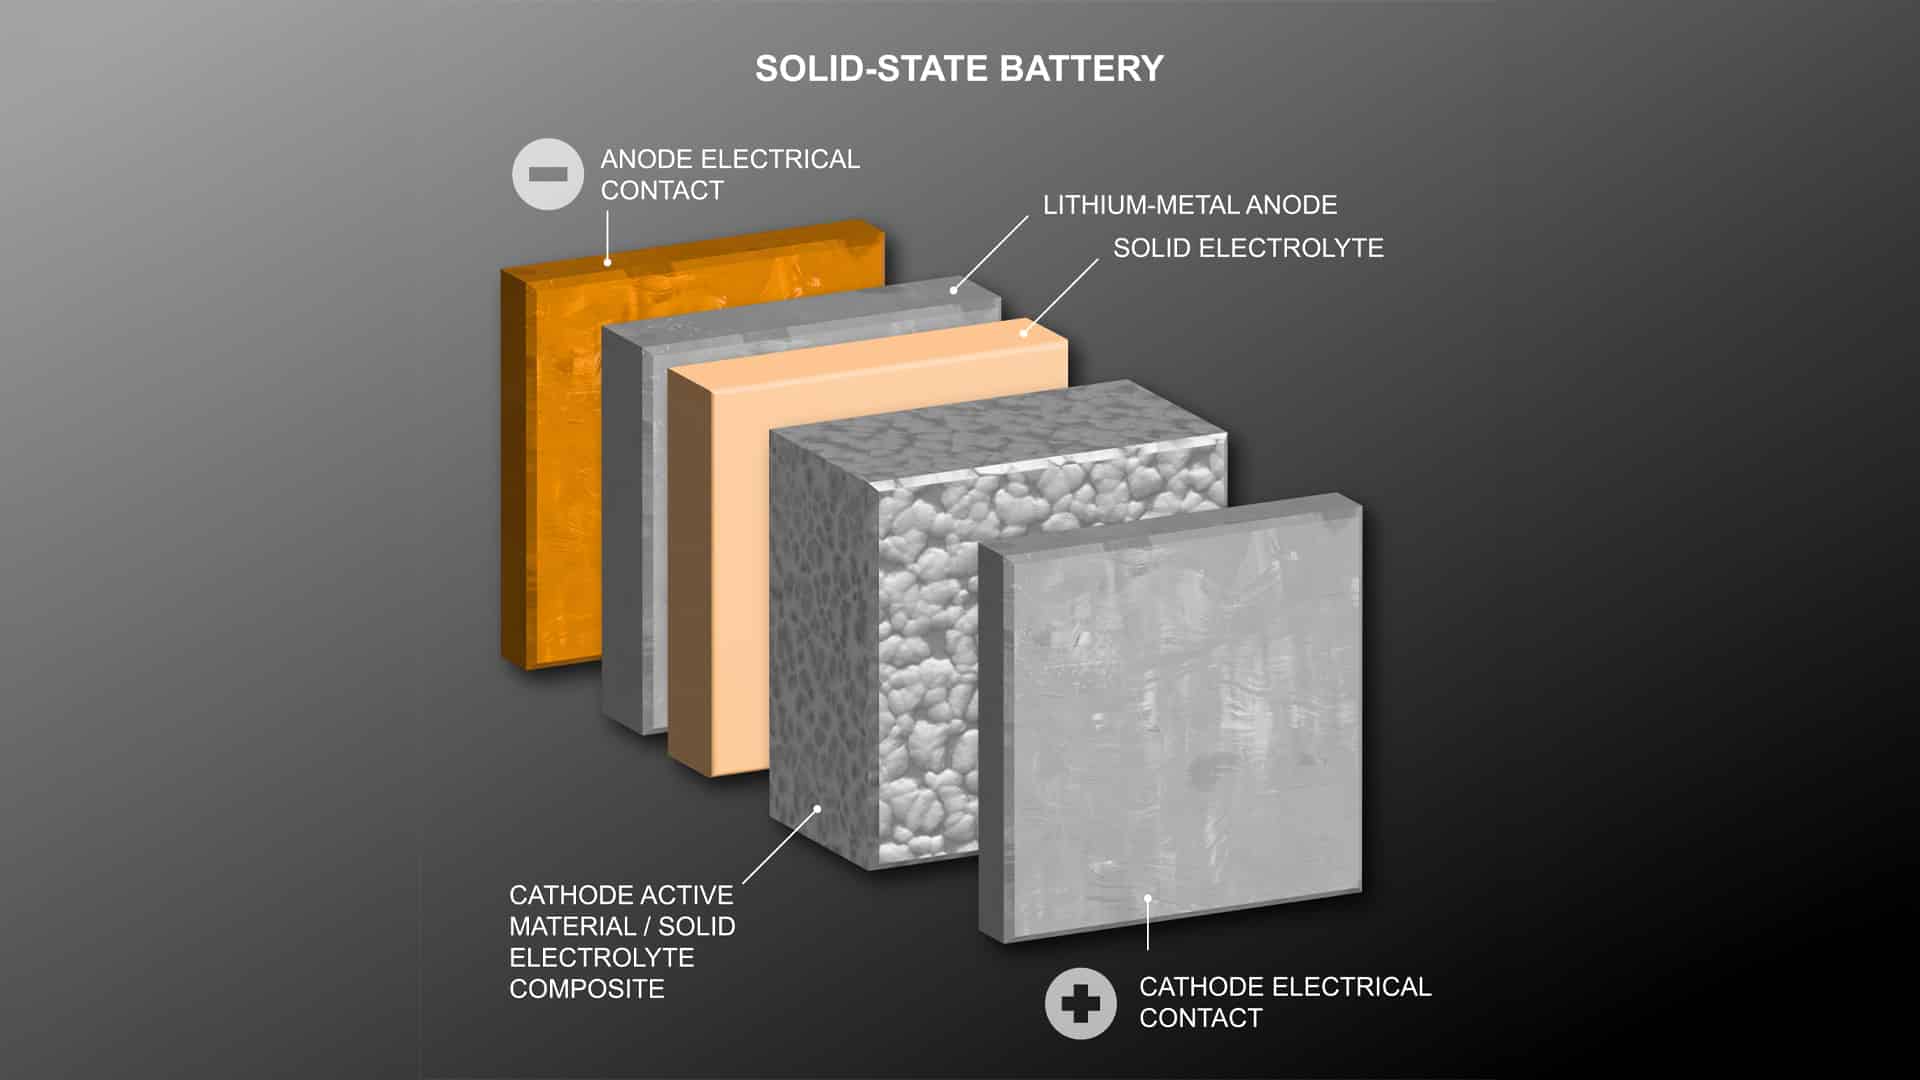 solid-state batteries are coming